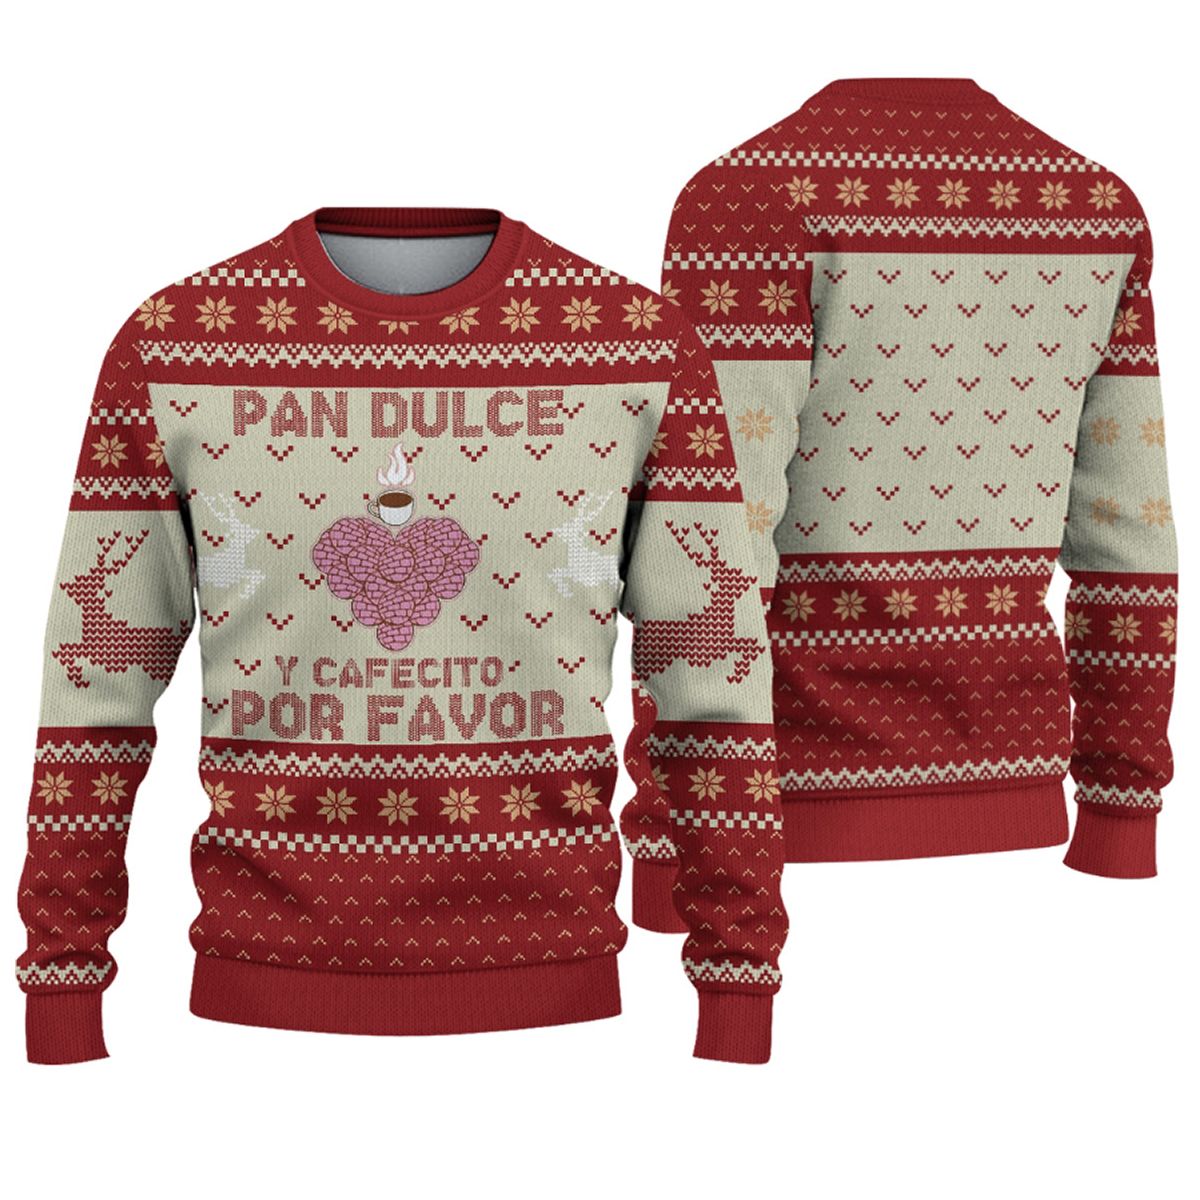 BUY NOW TOP UGLY CHRISTMAS SWEATER SO HOT IN HOLIDAY 30